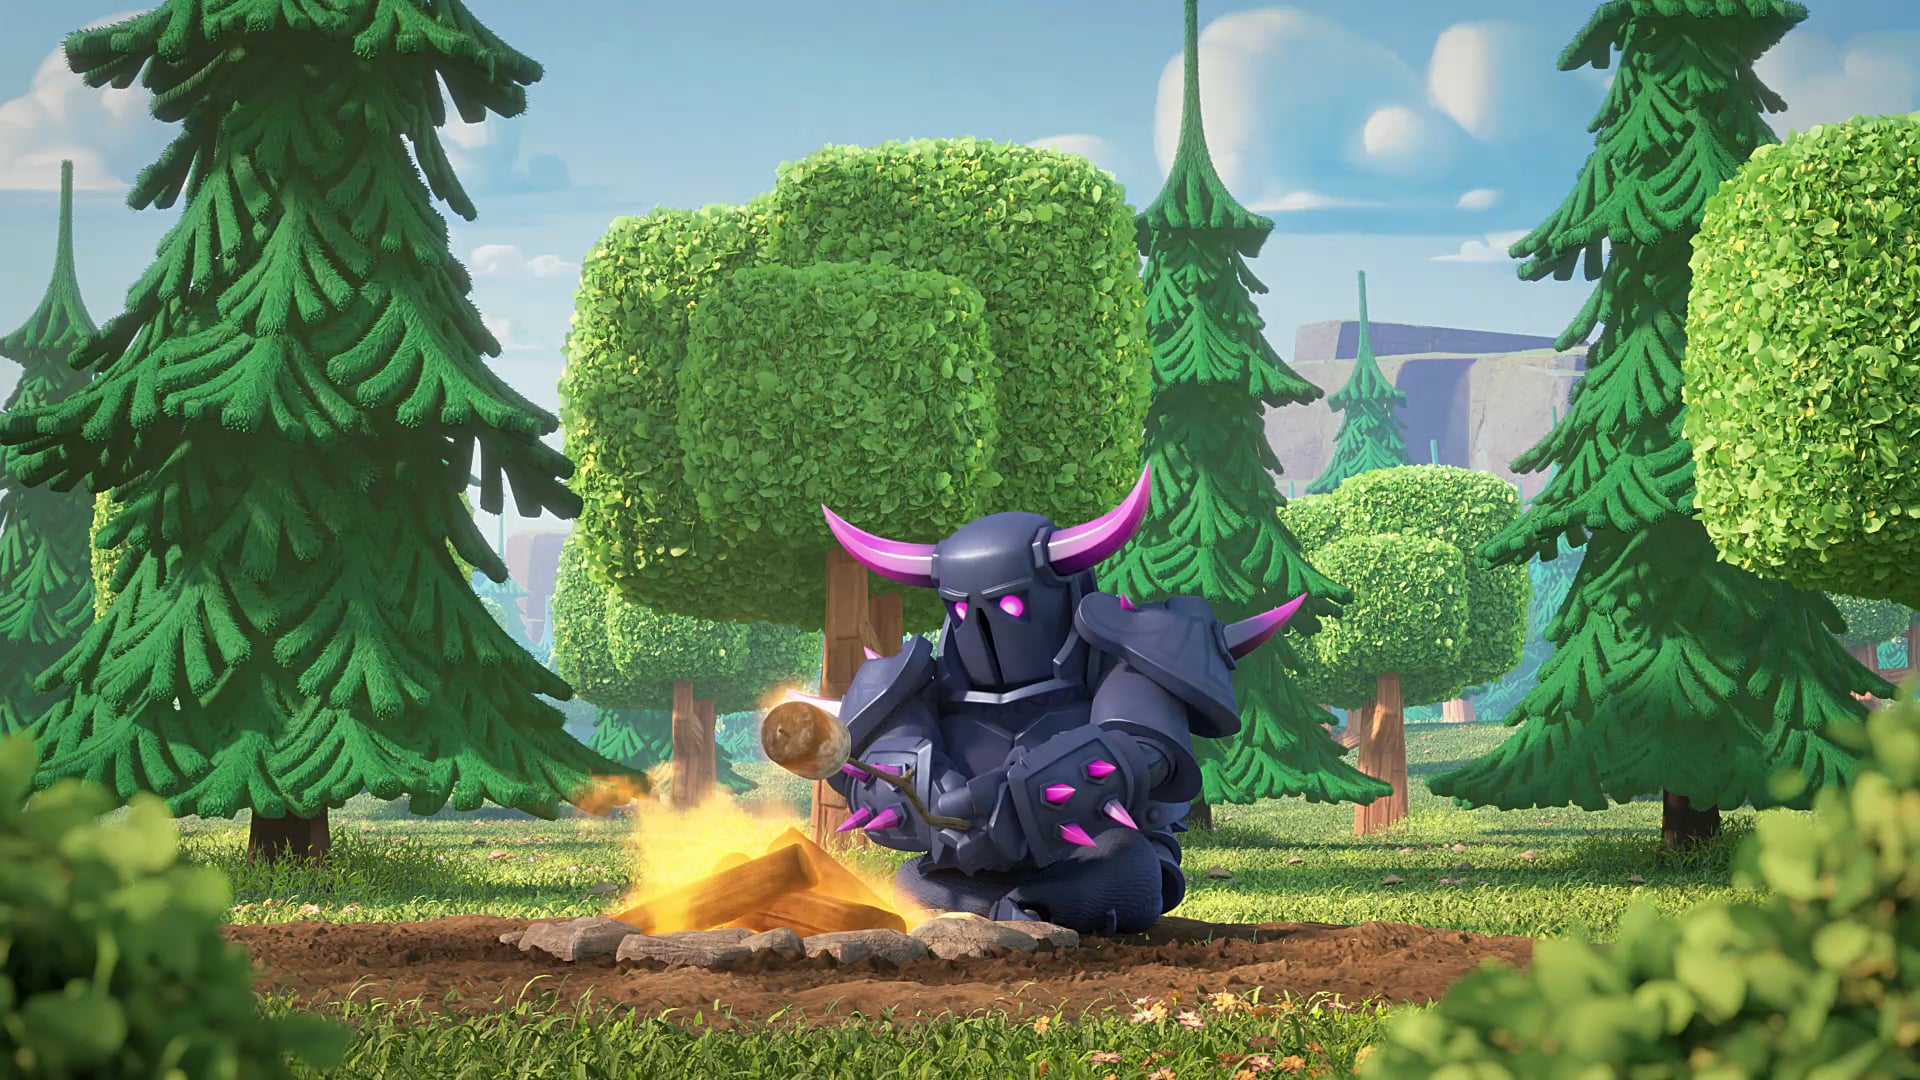 SUPERCELL "Clash of Clans: on Vimeo